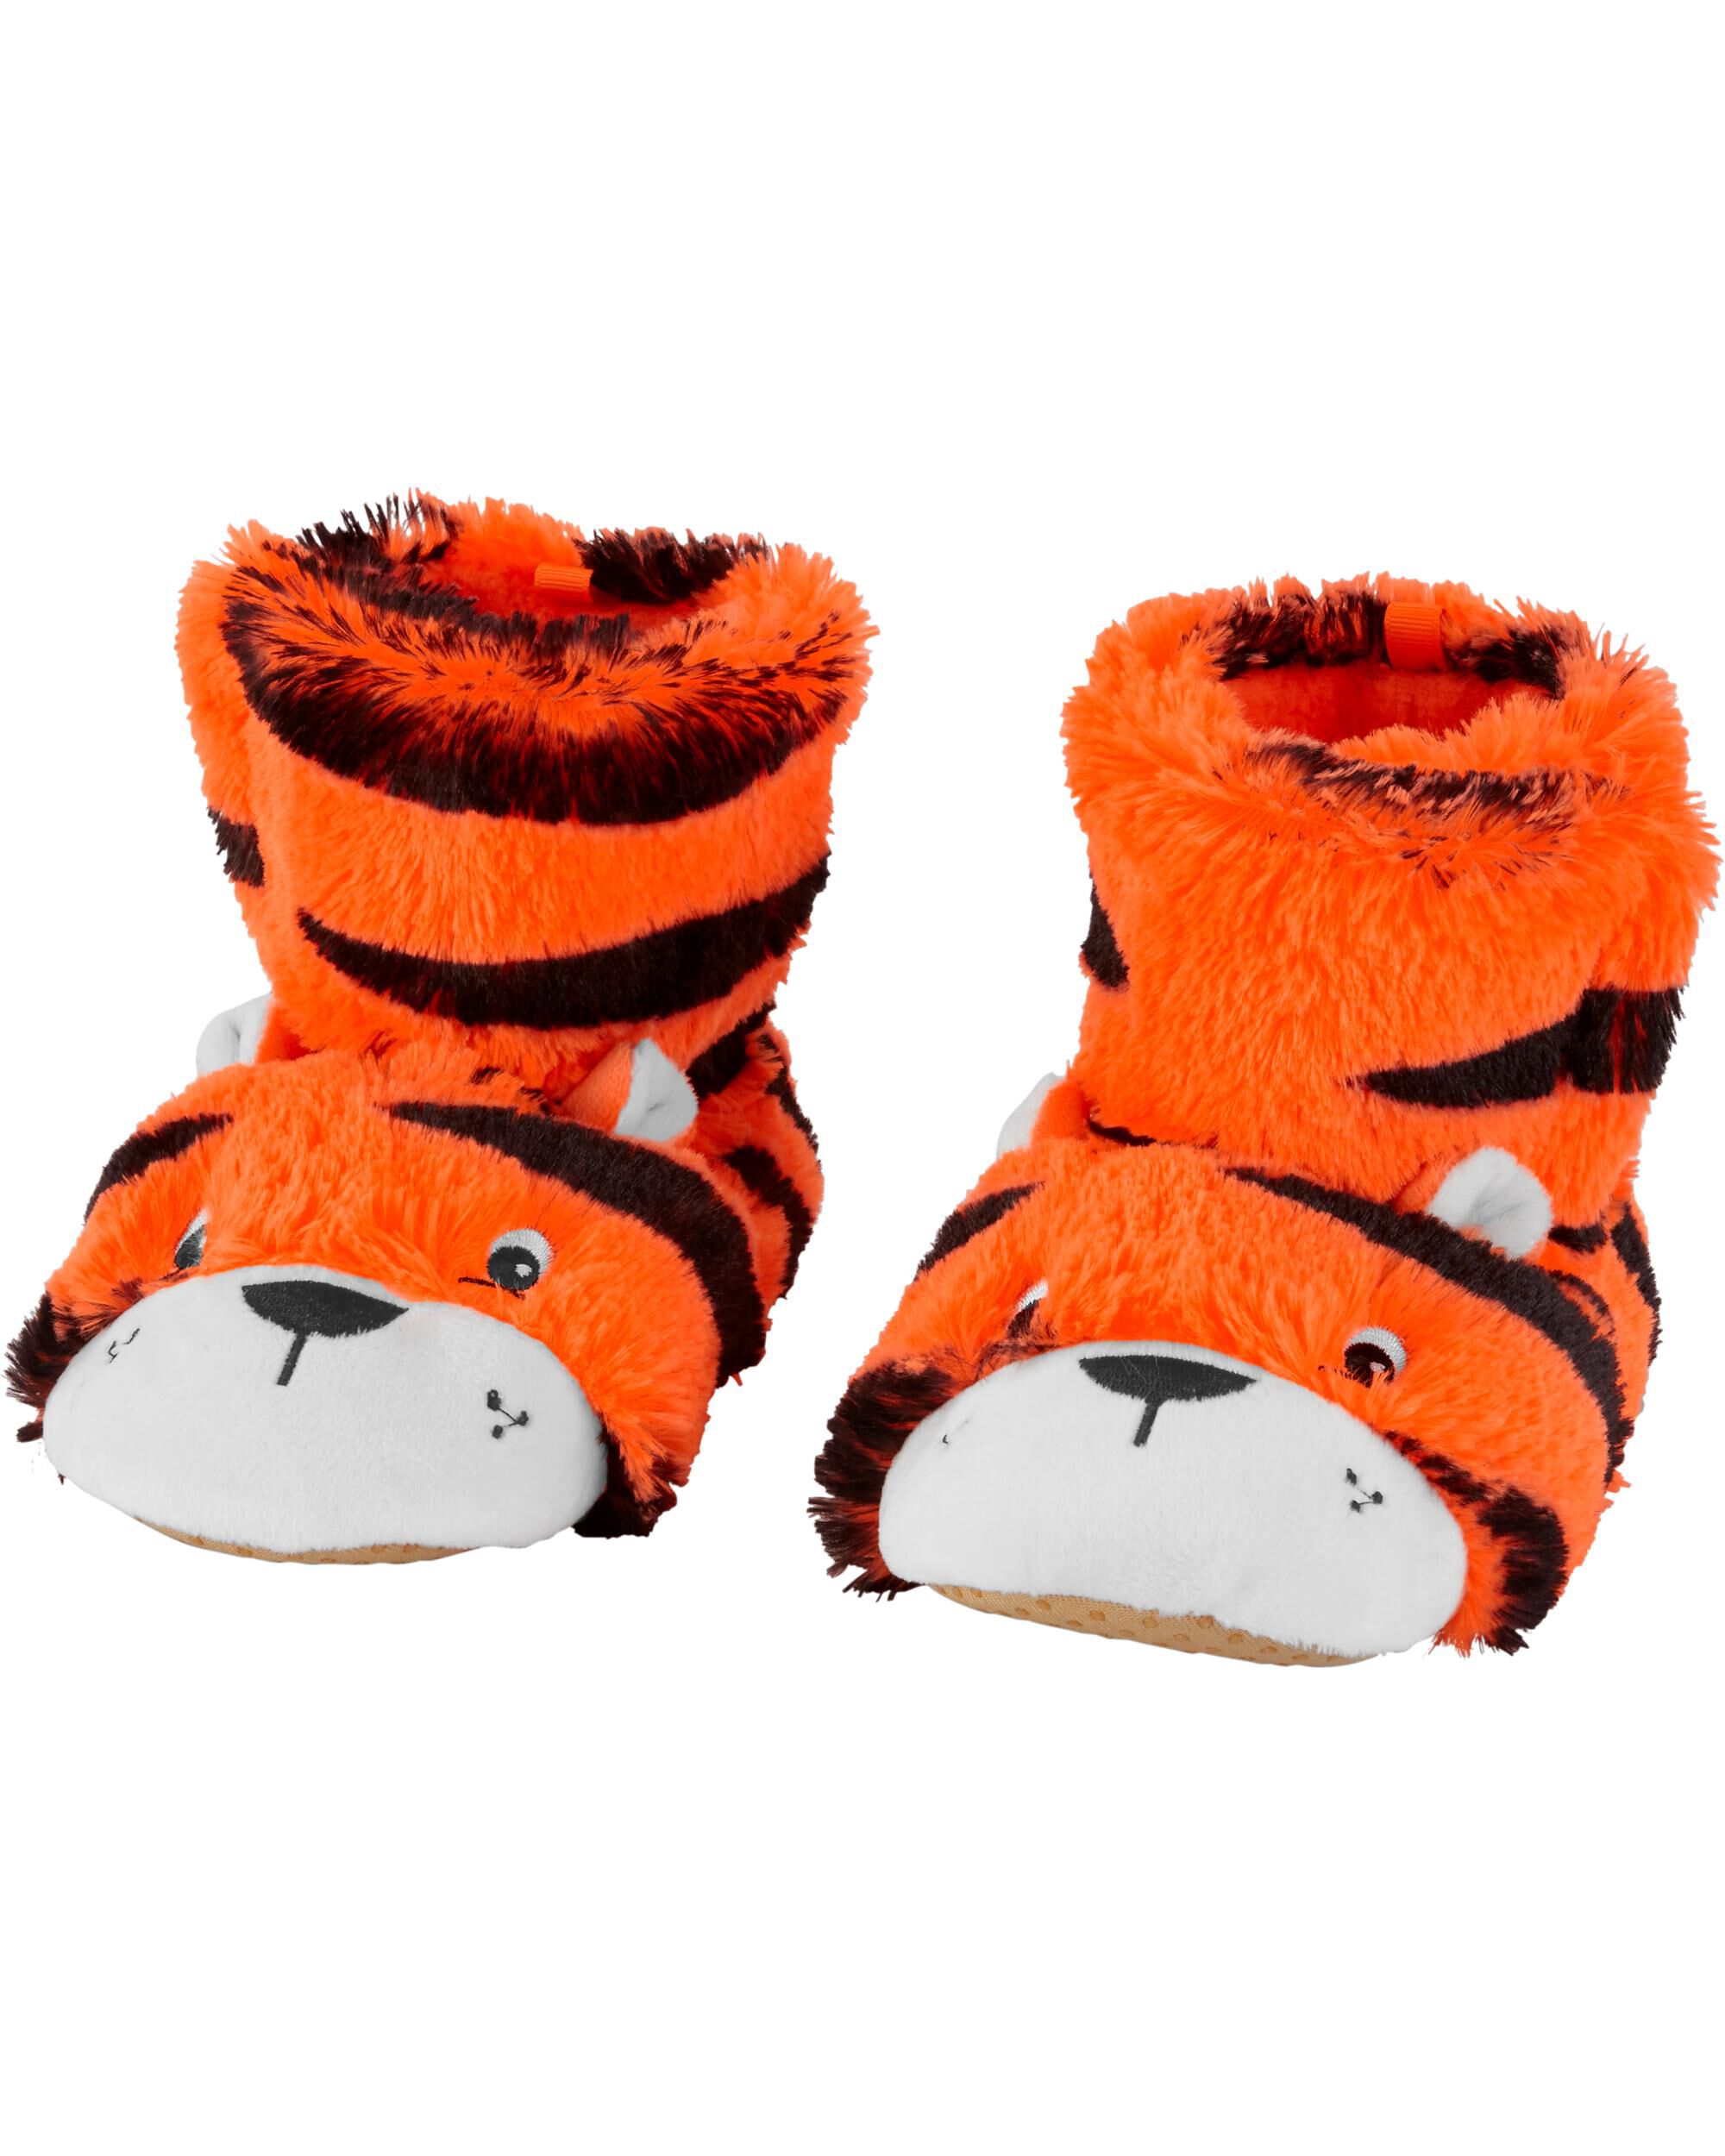 Tiger Slippers | carters.com